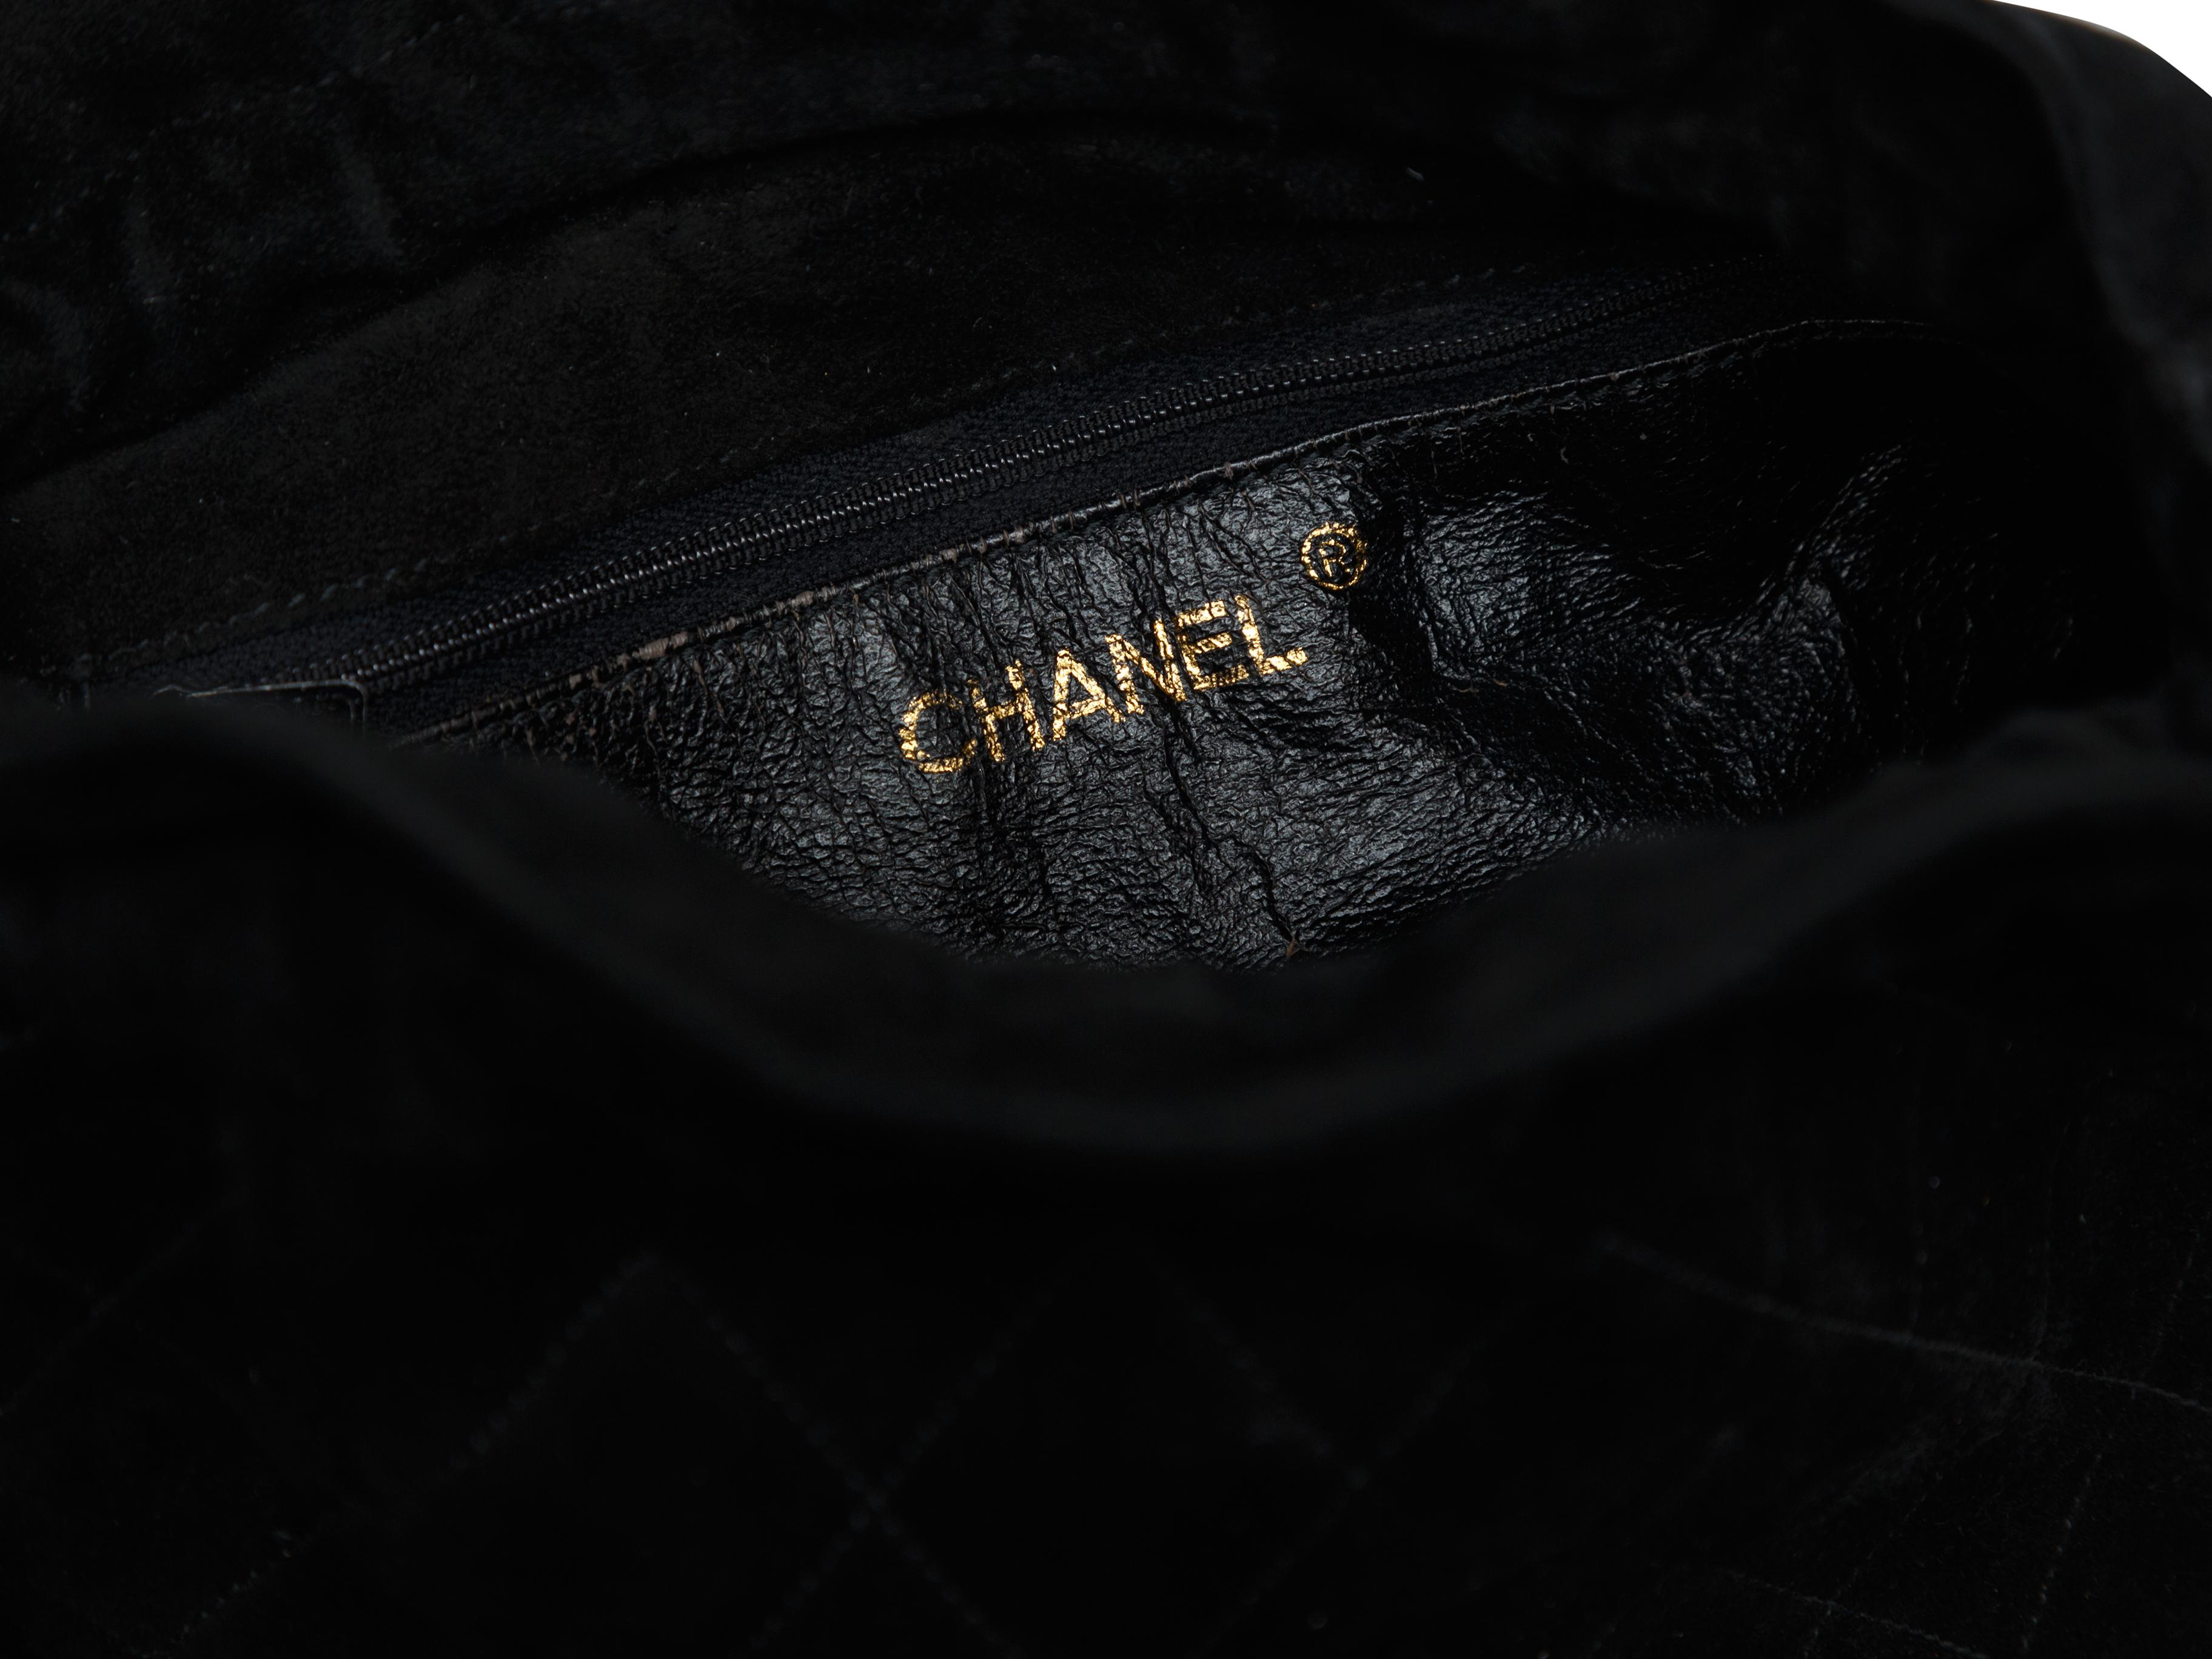 Product details: Vintage black quilted suede leather bucket bag by Chanel. Gold-tone hardware. Chain shoulder strap. 7.5